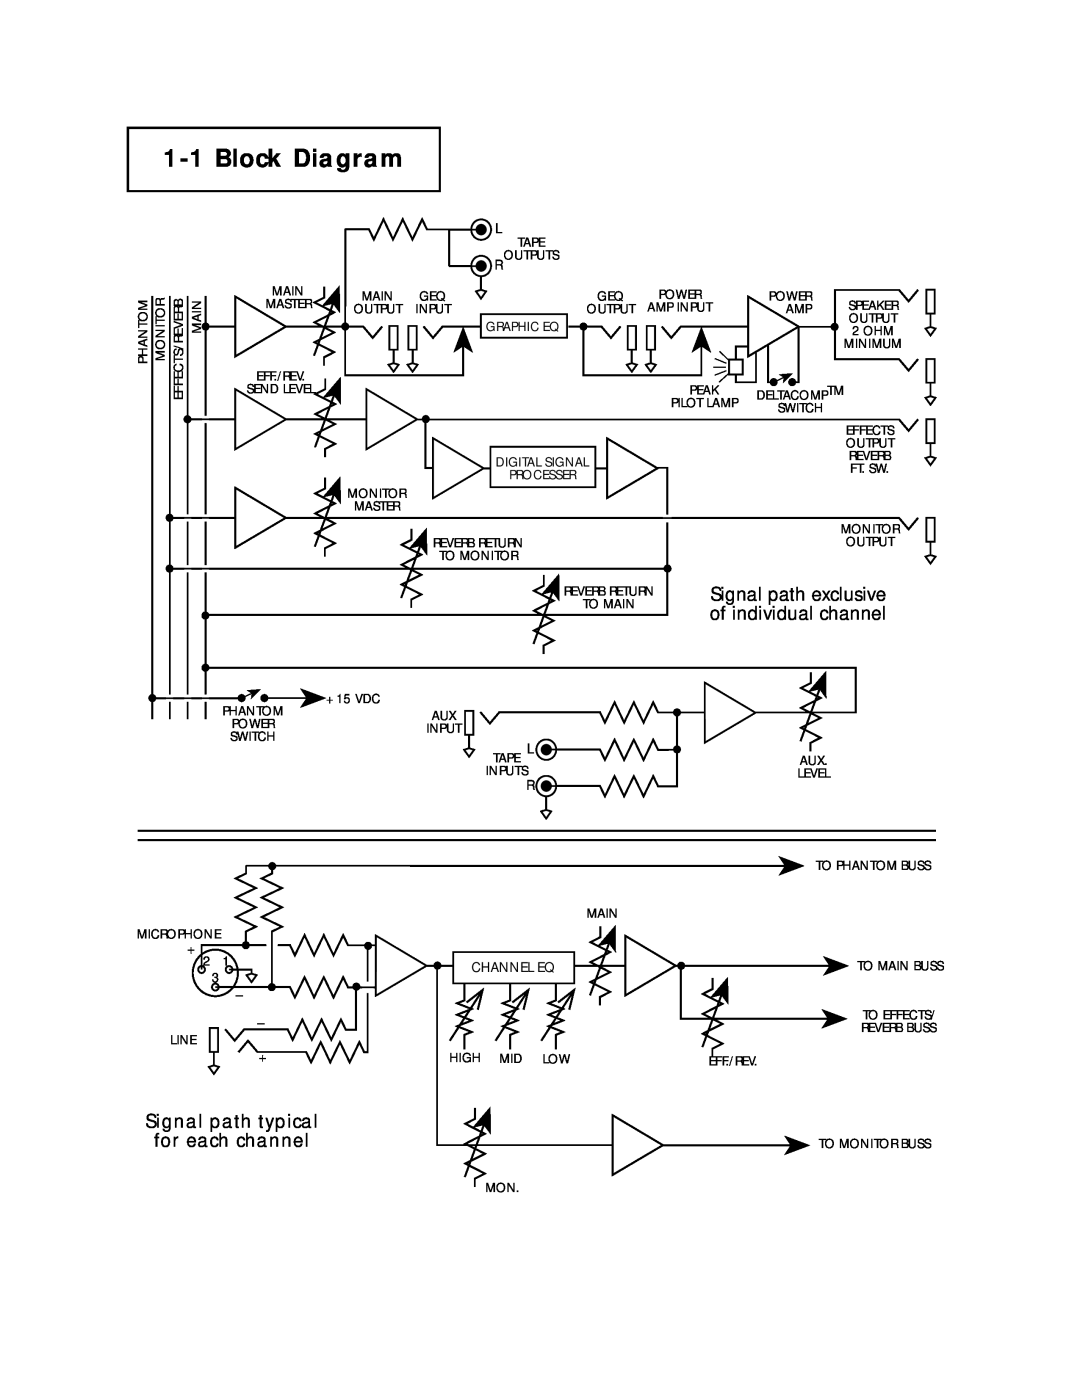 Fender SR-8520PD, SR-6520PD owner manual Block Diagram, Signal path typical for each channel 